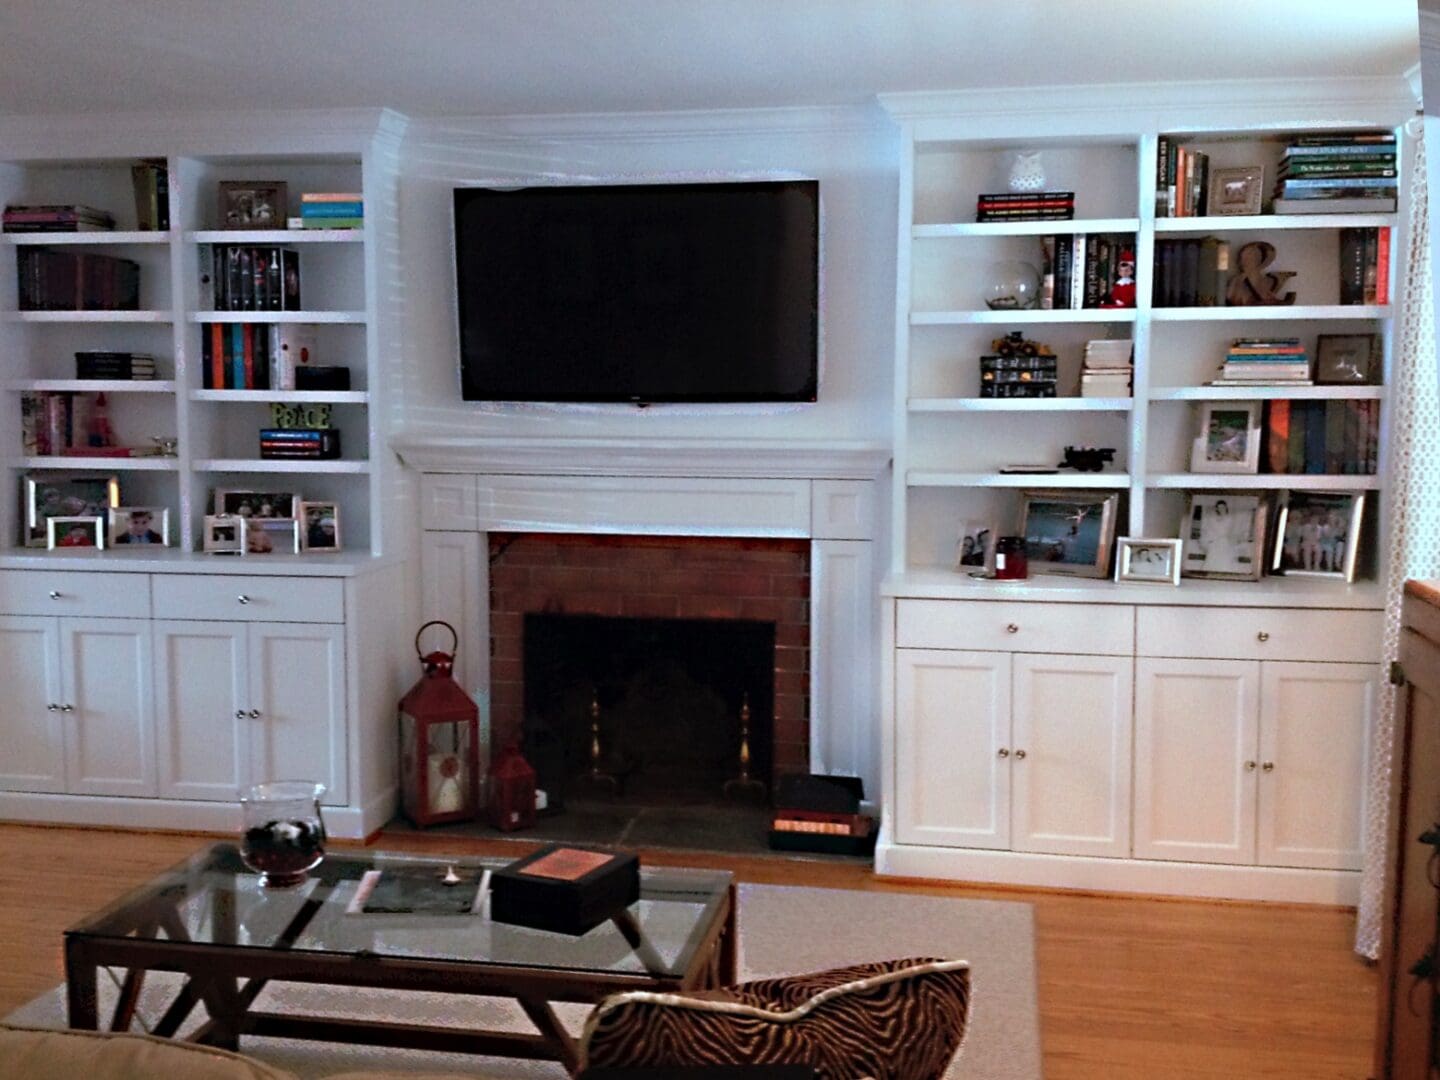 A Flat Screen Above a Fireplace With Bookshelves